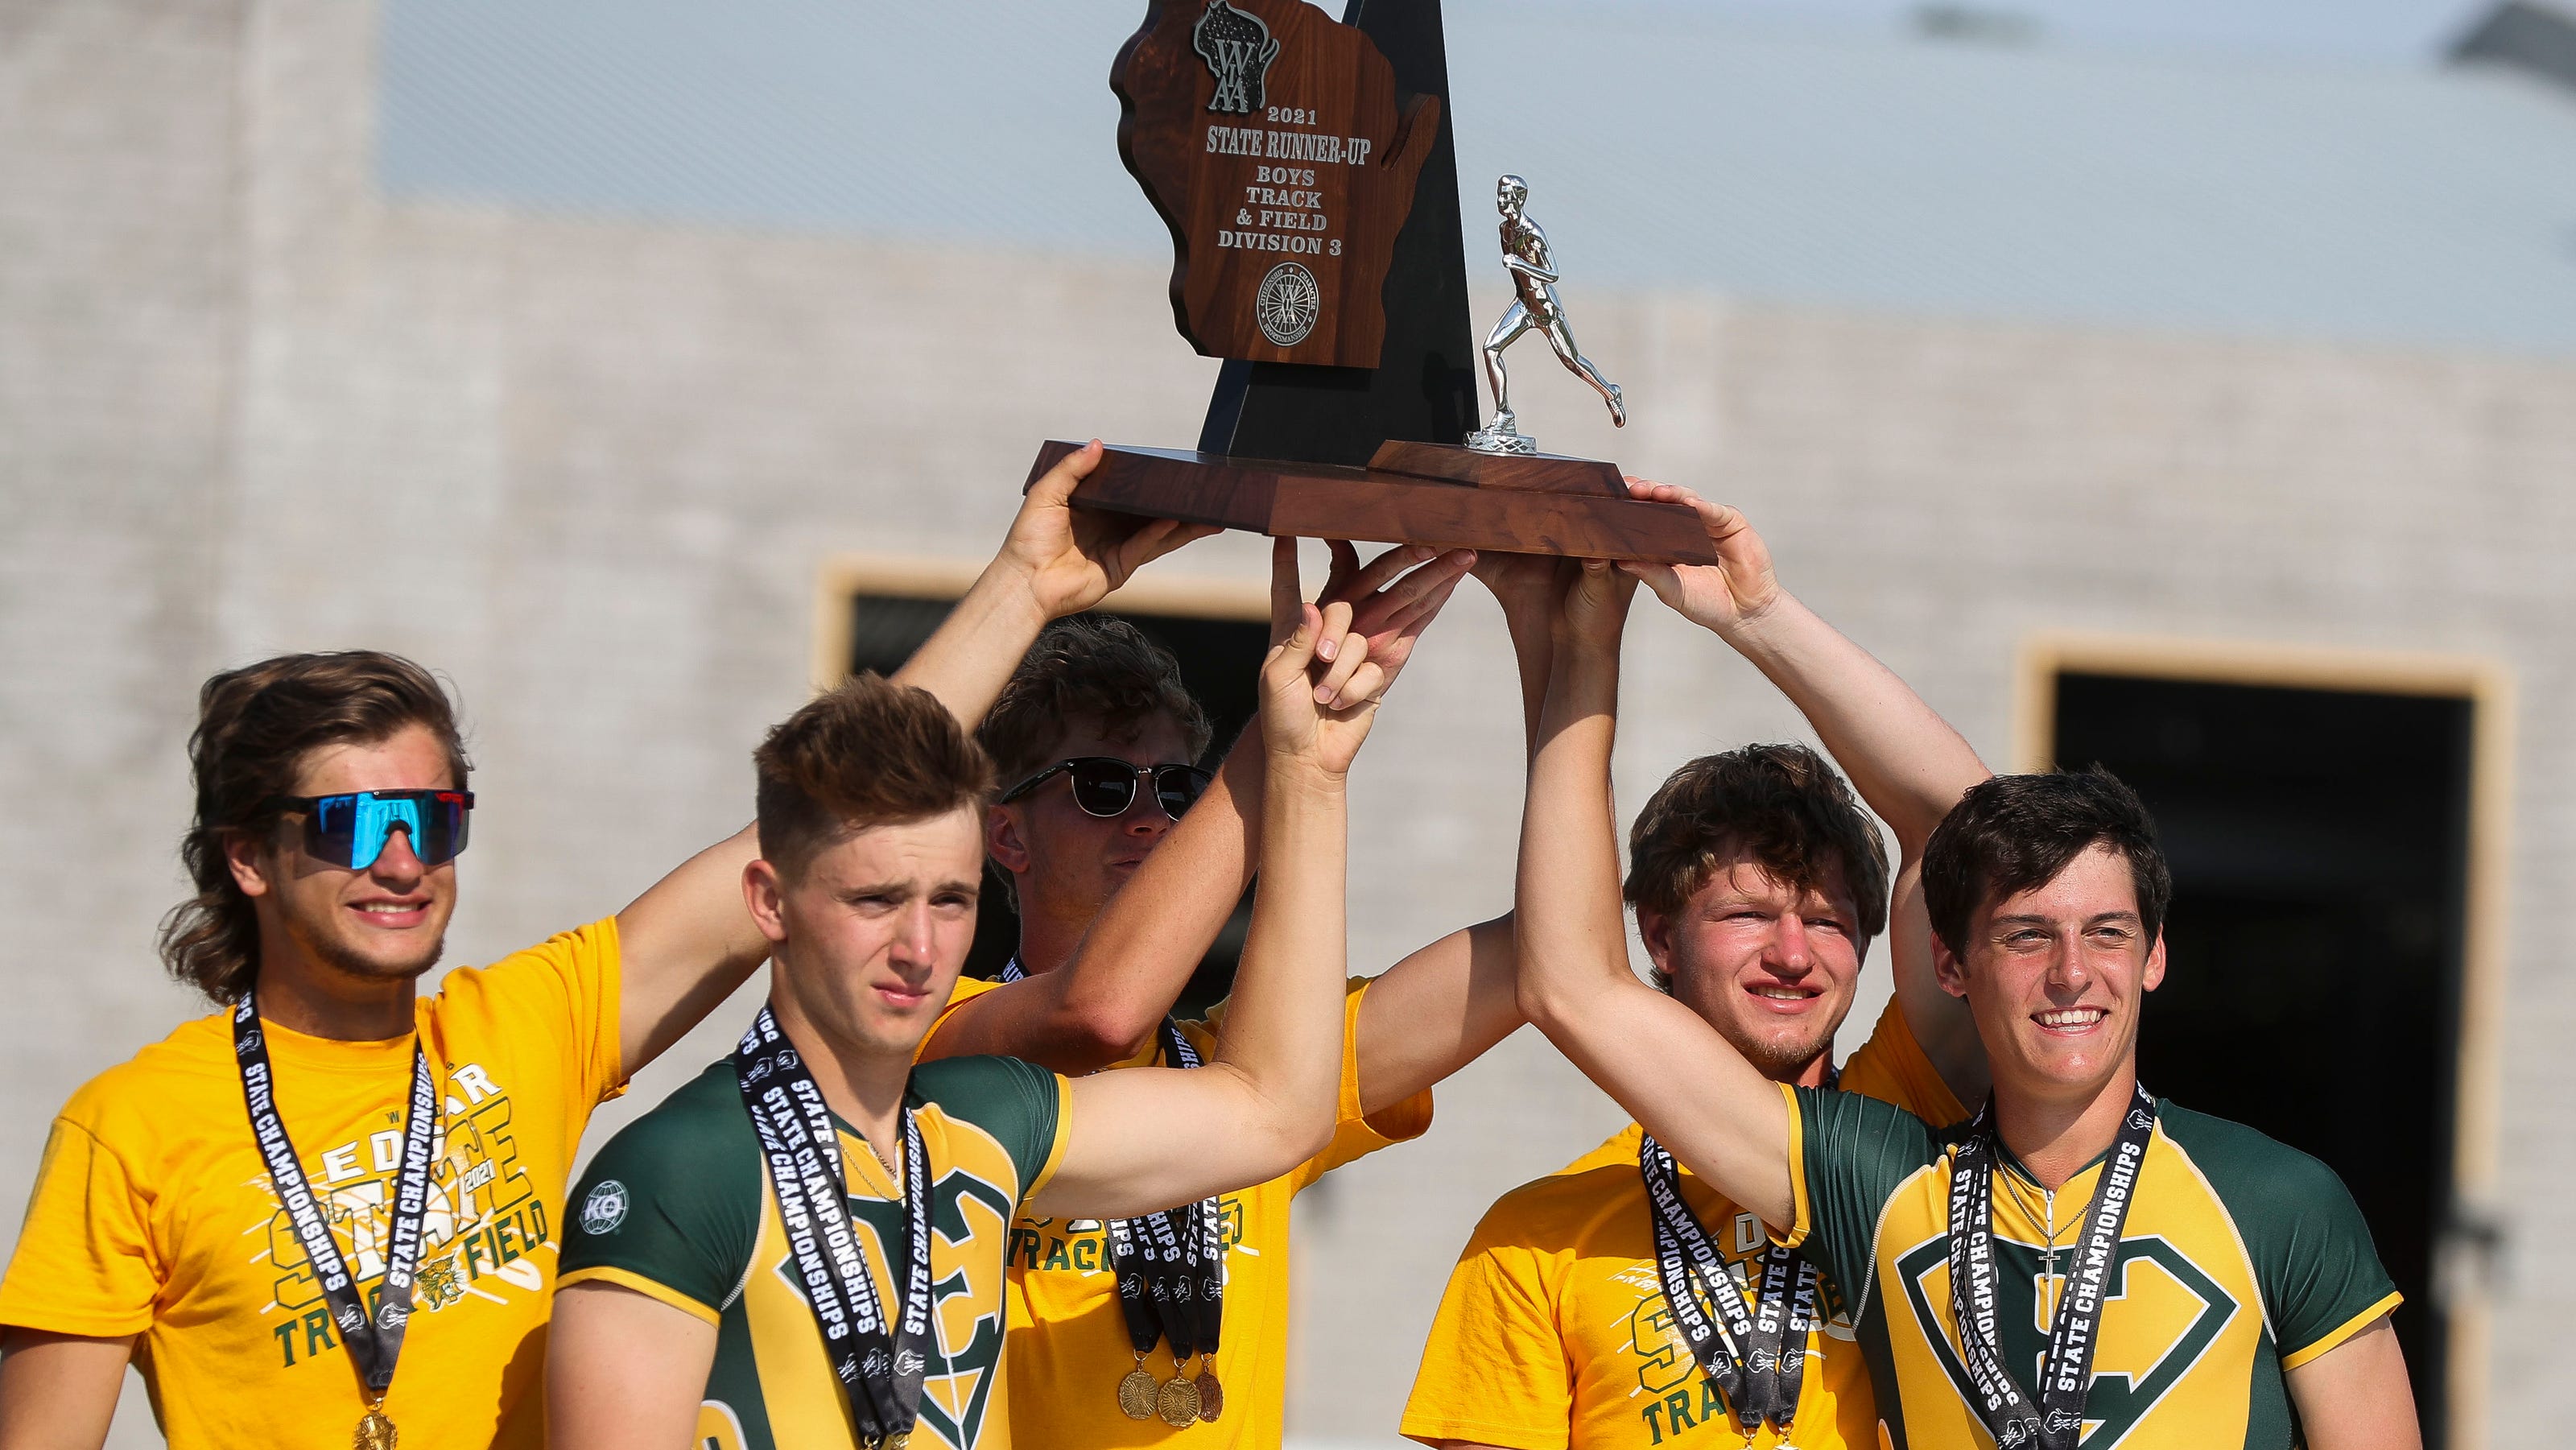 Edgar boys win three relay titles at WIAA state track and field finals